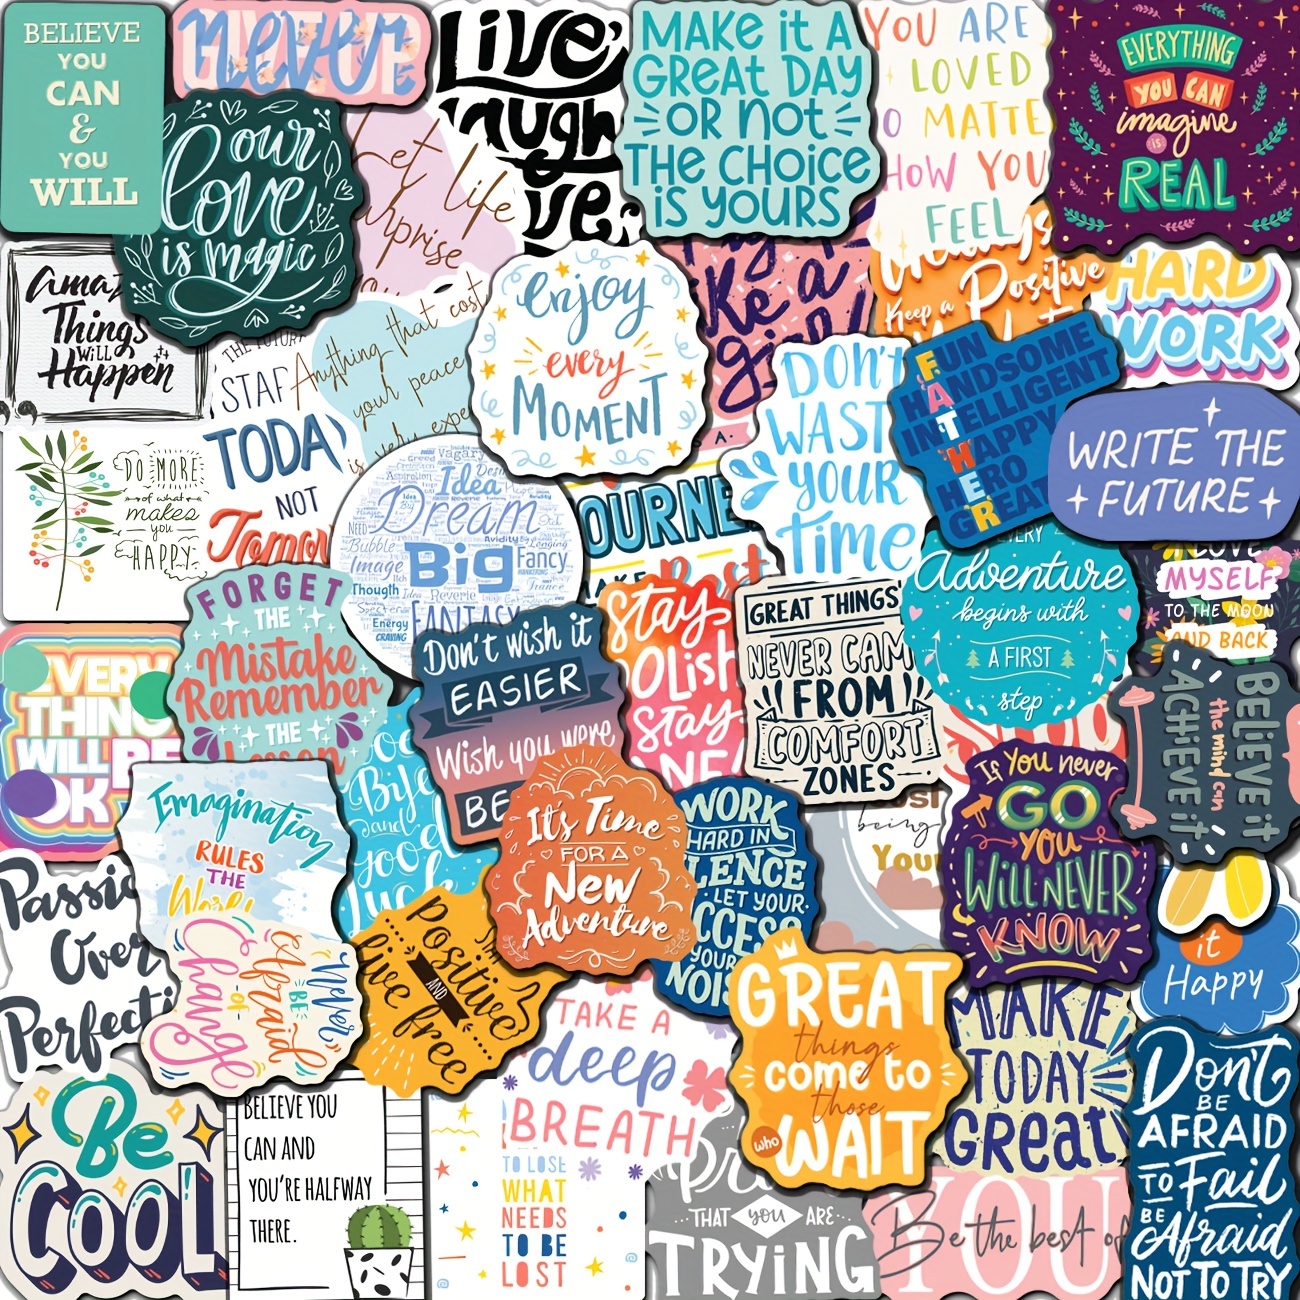 Vision Board Kit, Inspirational Quote Cards, Positive Affirmation